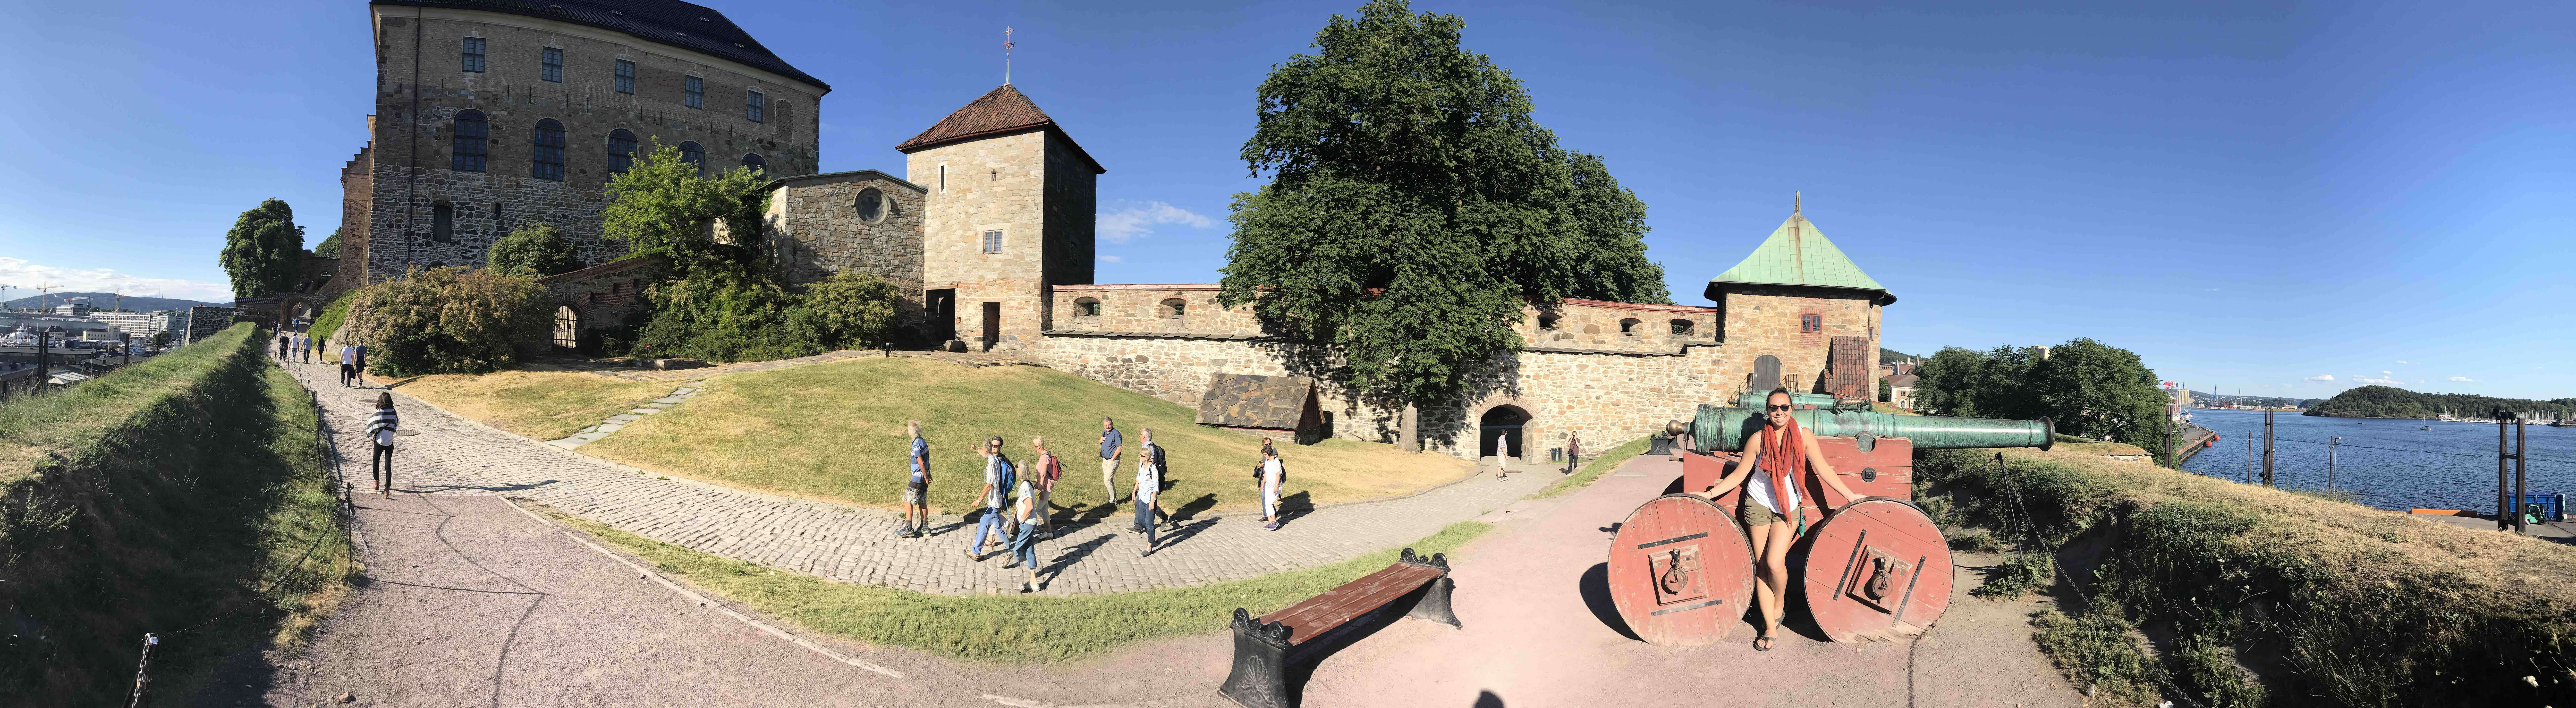 pano-at-castle-1